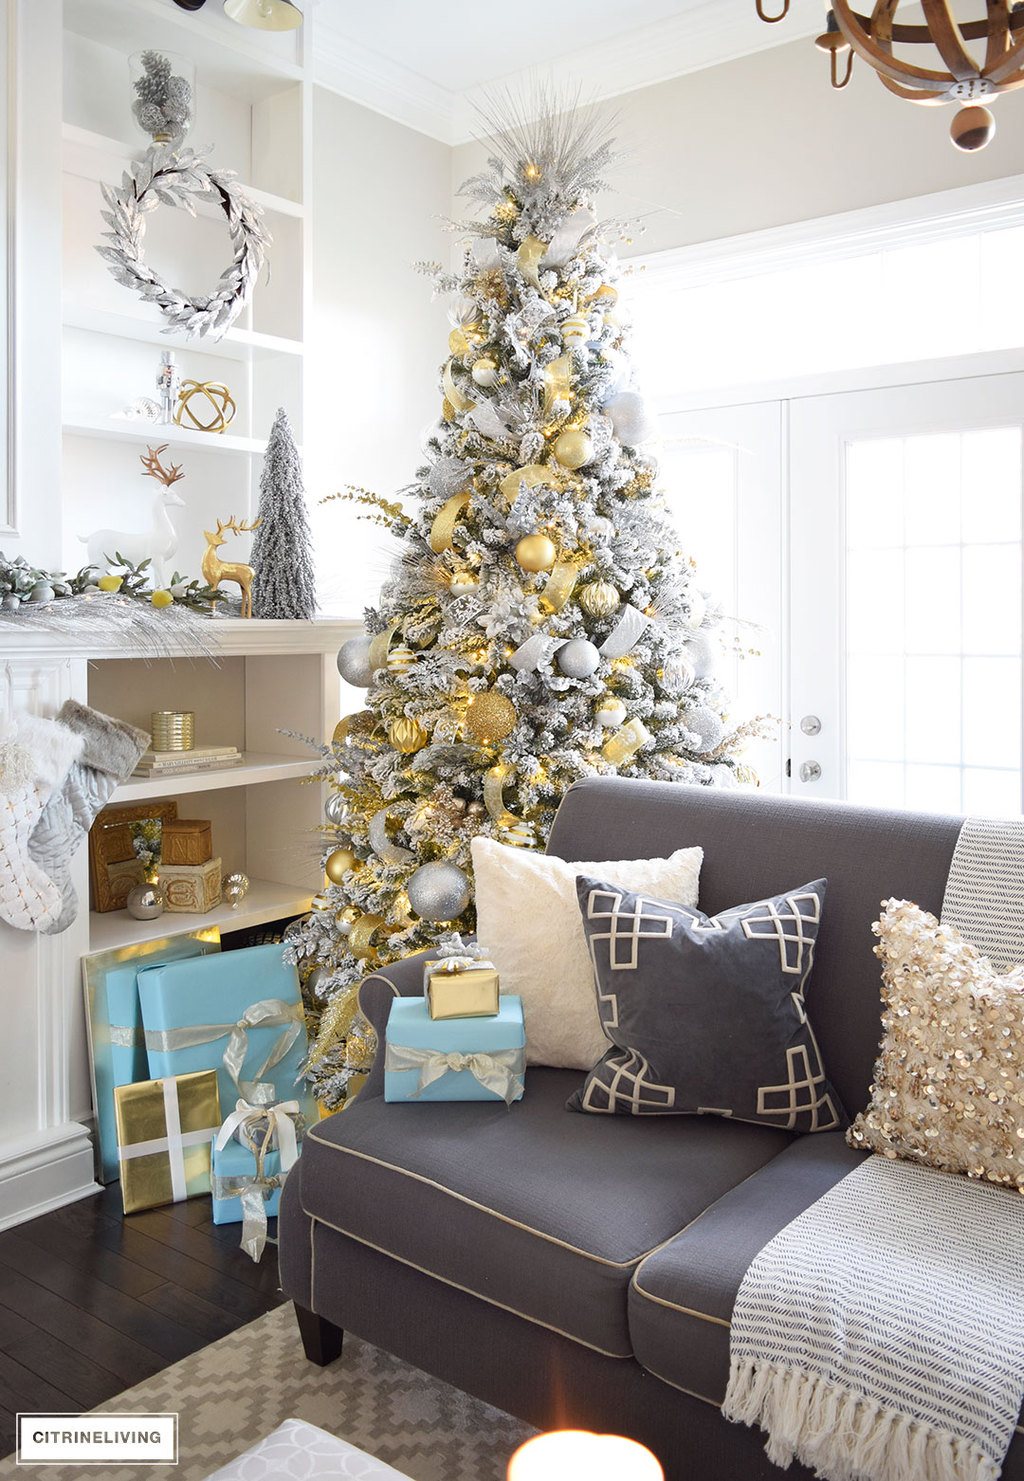 Christmas Home Tour - Stunning flocked Christmas tree with beautiful metallics and icy blue create a chic Holiday theme